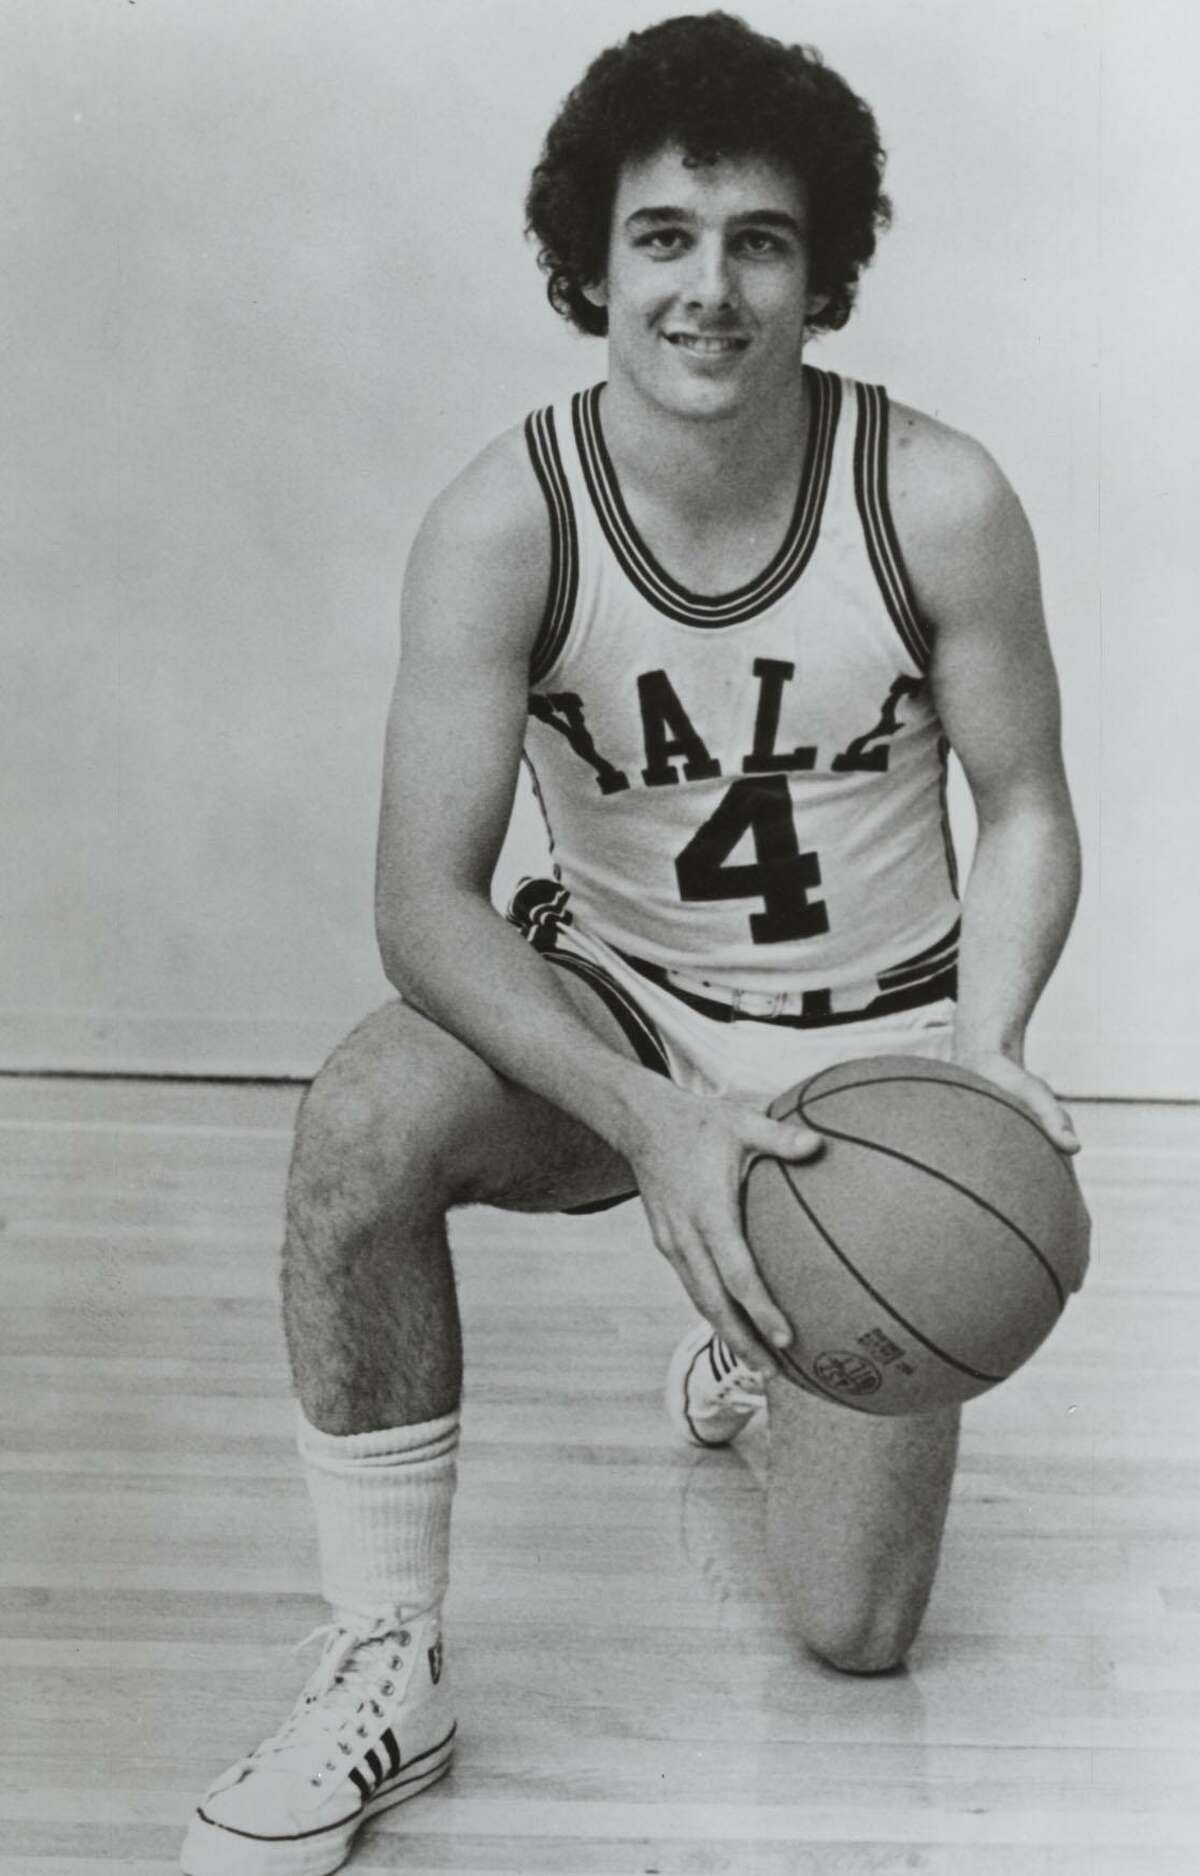 Jim Morgan outscored Pete Maravich in Yale's lone meeting with LSU 50 years ago -- a 97-94 victory in Hawaii.